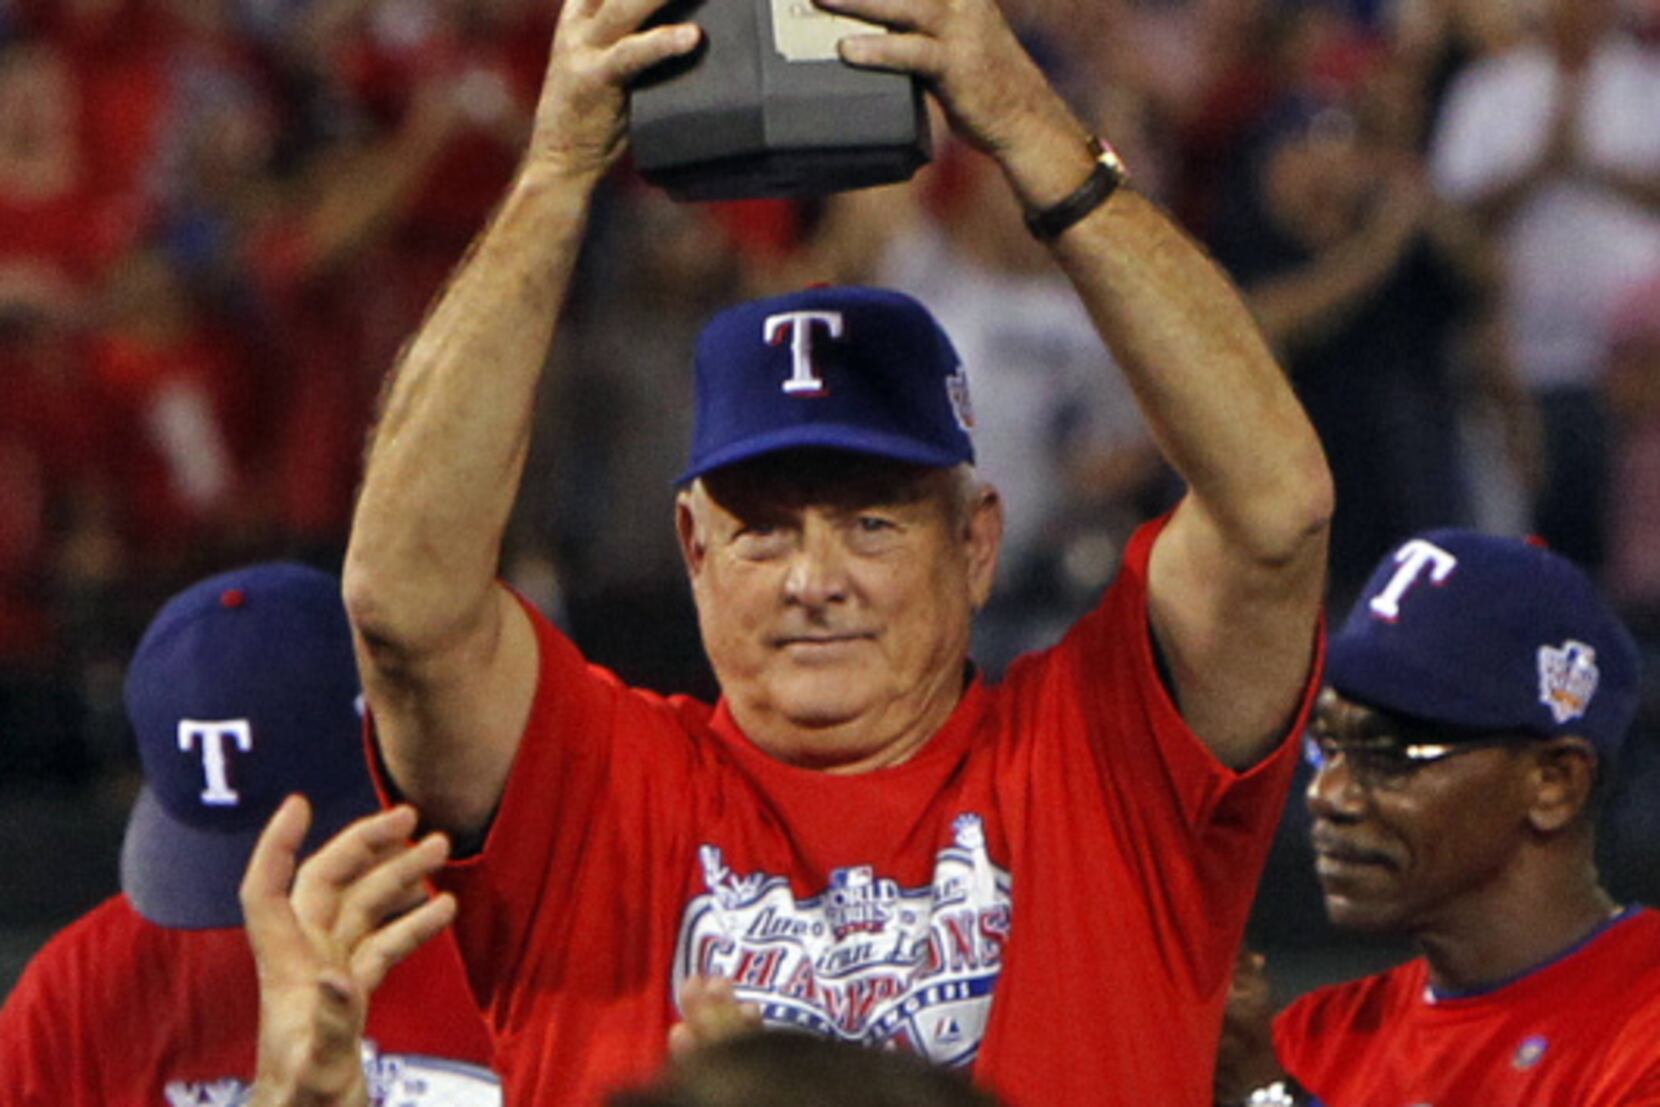 MLB approves Nolan Ryan as controlling owner of the Rangers